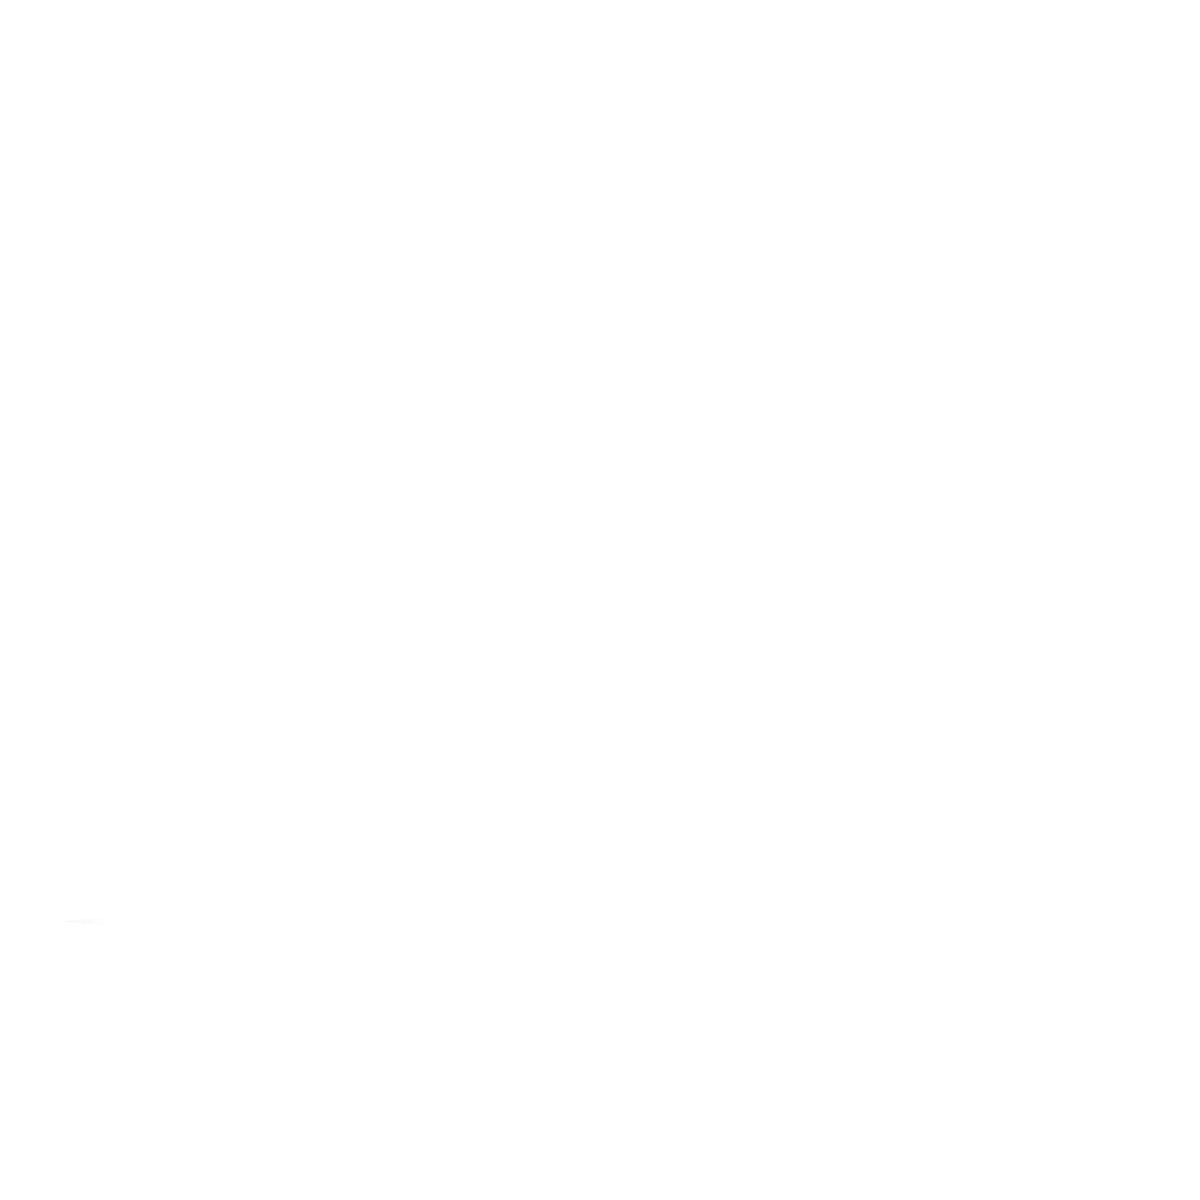 MOUNTAINS ARE CALLING 20oz COFFEE CUP  HELLS CANYON DESIGNS - Hells Canyon  Designs